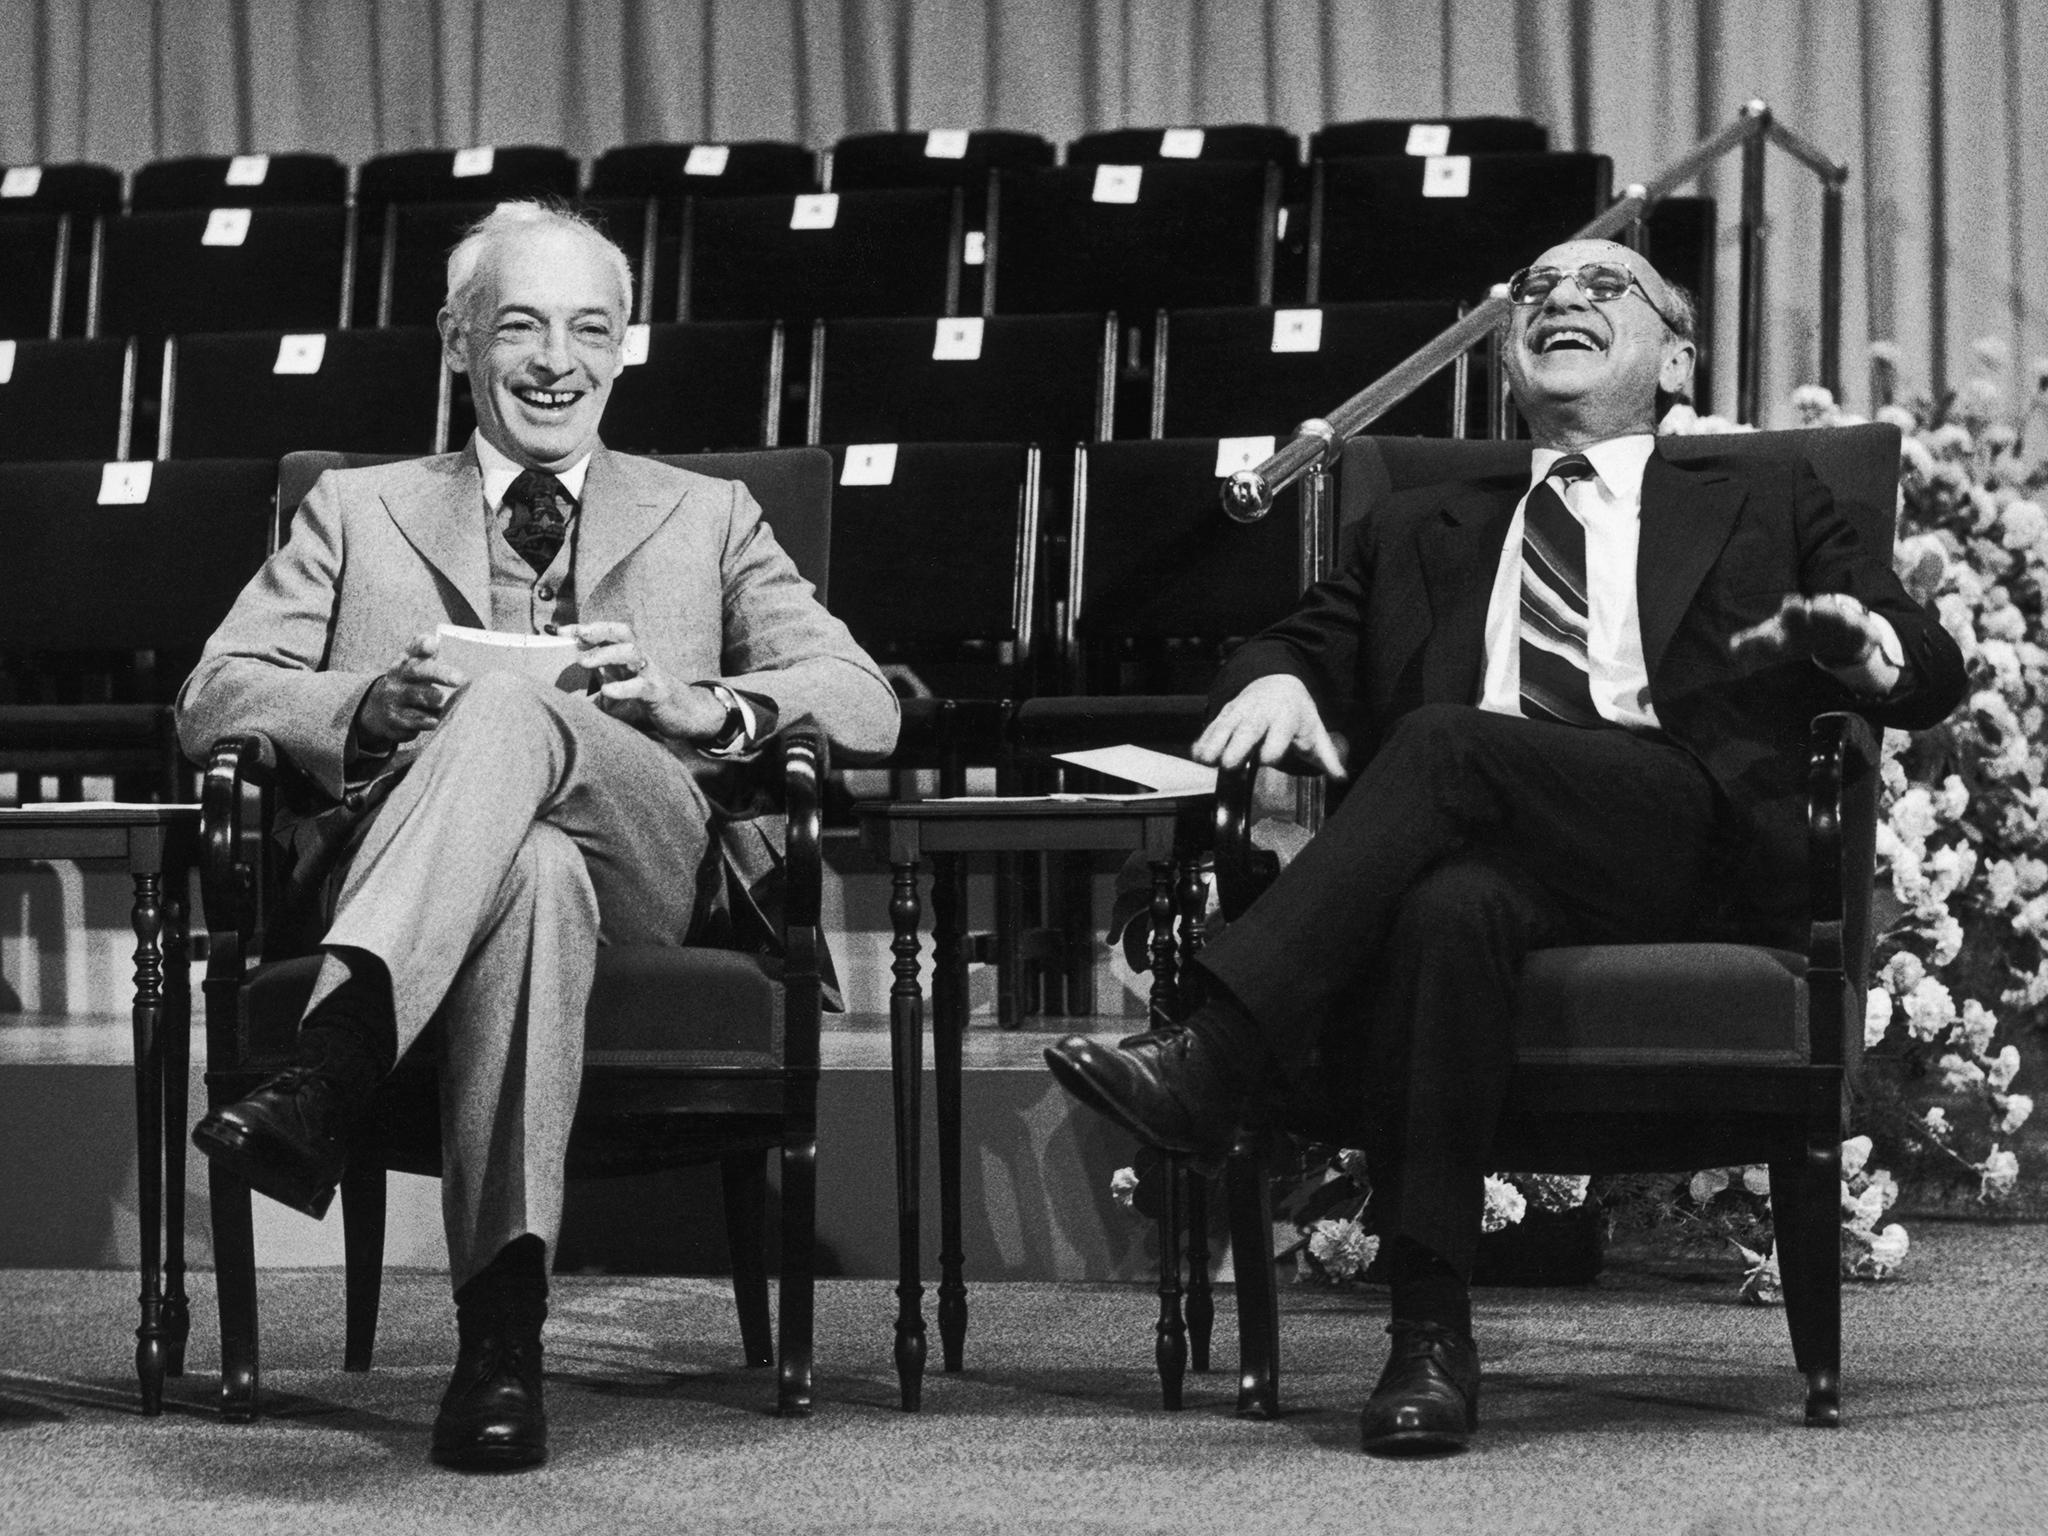 Saul Bellow (left) with Milton Friedman, shortly after they were awarded the Nobel Prize for literature and economics respectively in 1976